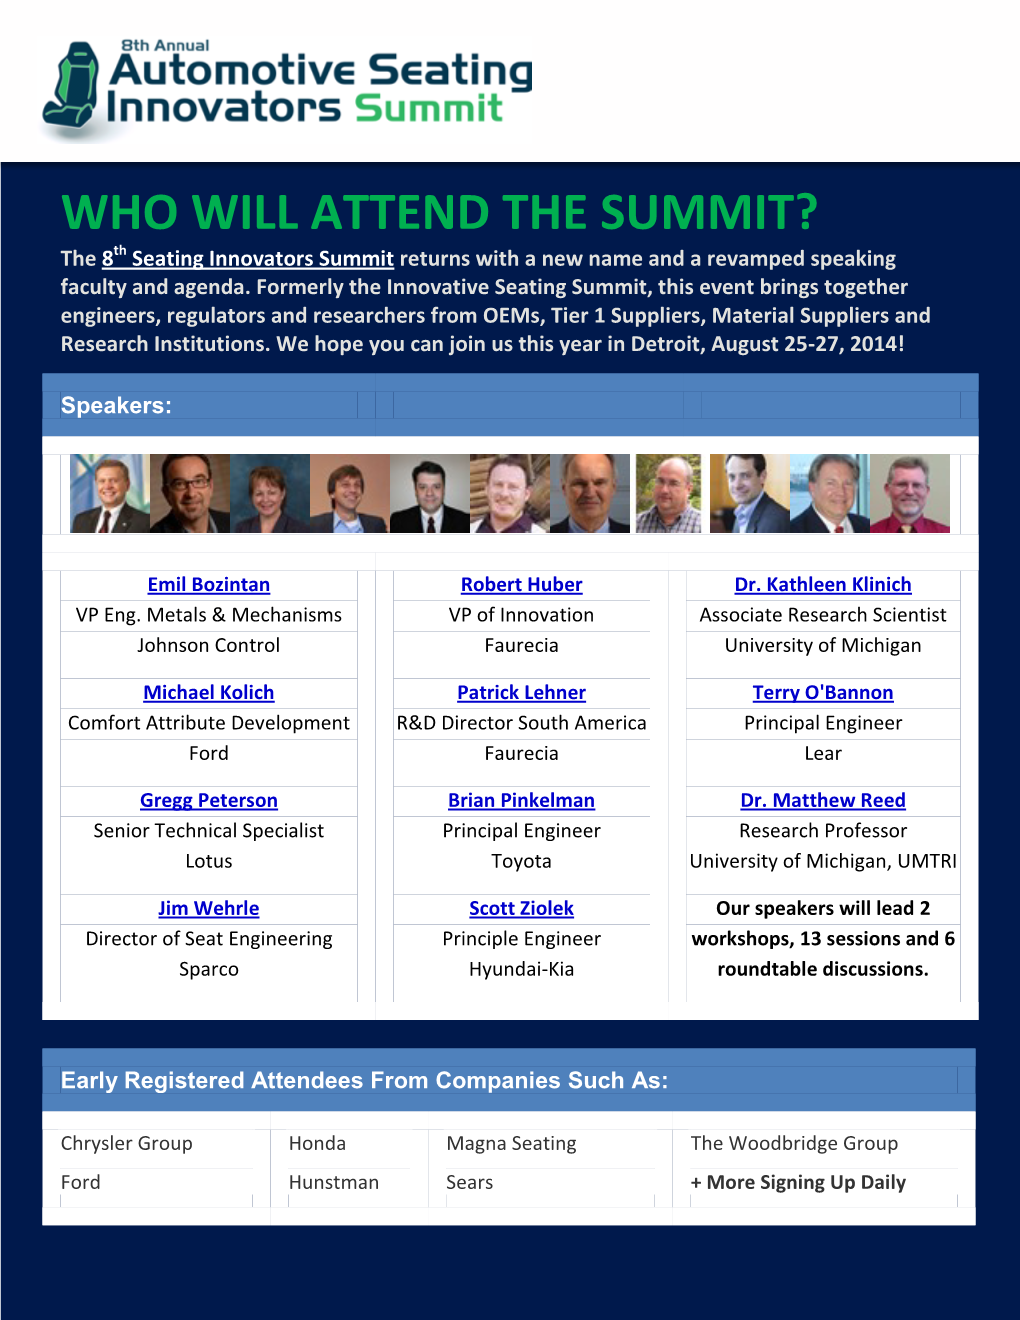 WHO WILL ATTEND the SUMMIT? the 8Th Seating Innovators Summit Returns with a New Name and a Revamped Speaking Faculty and Agenda